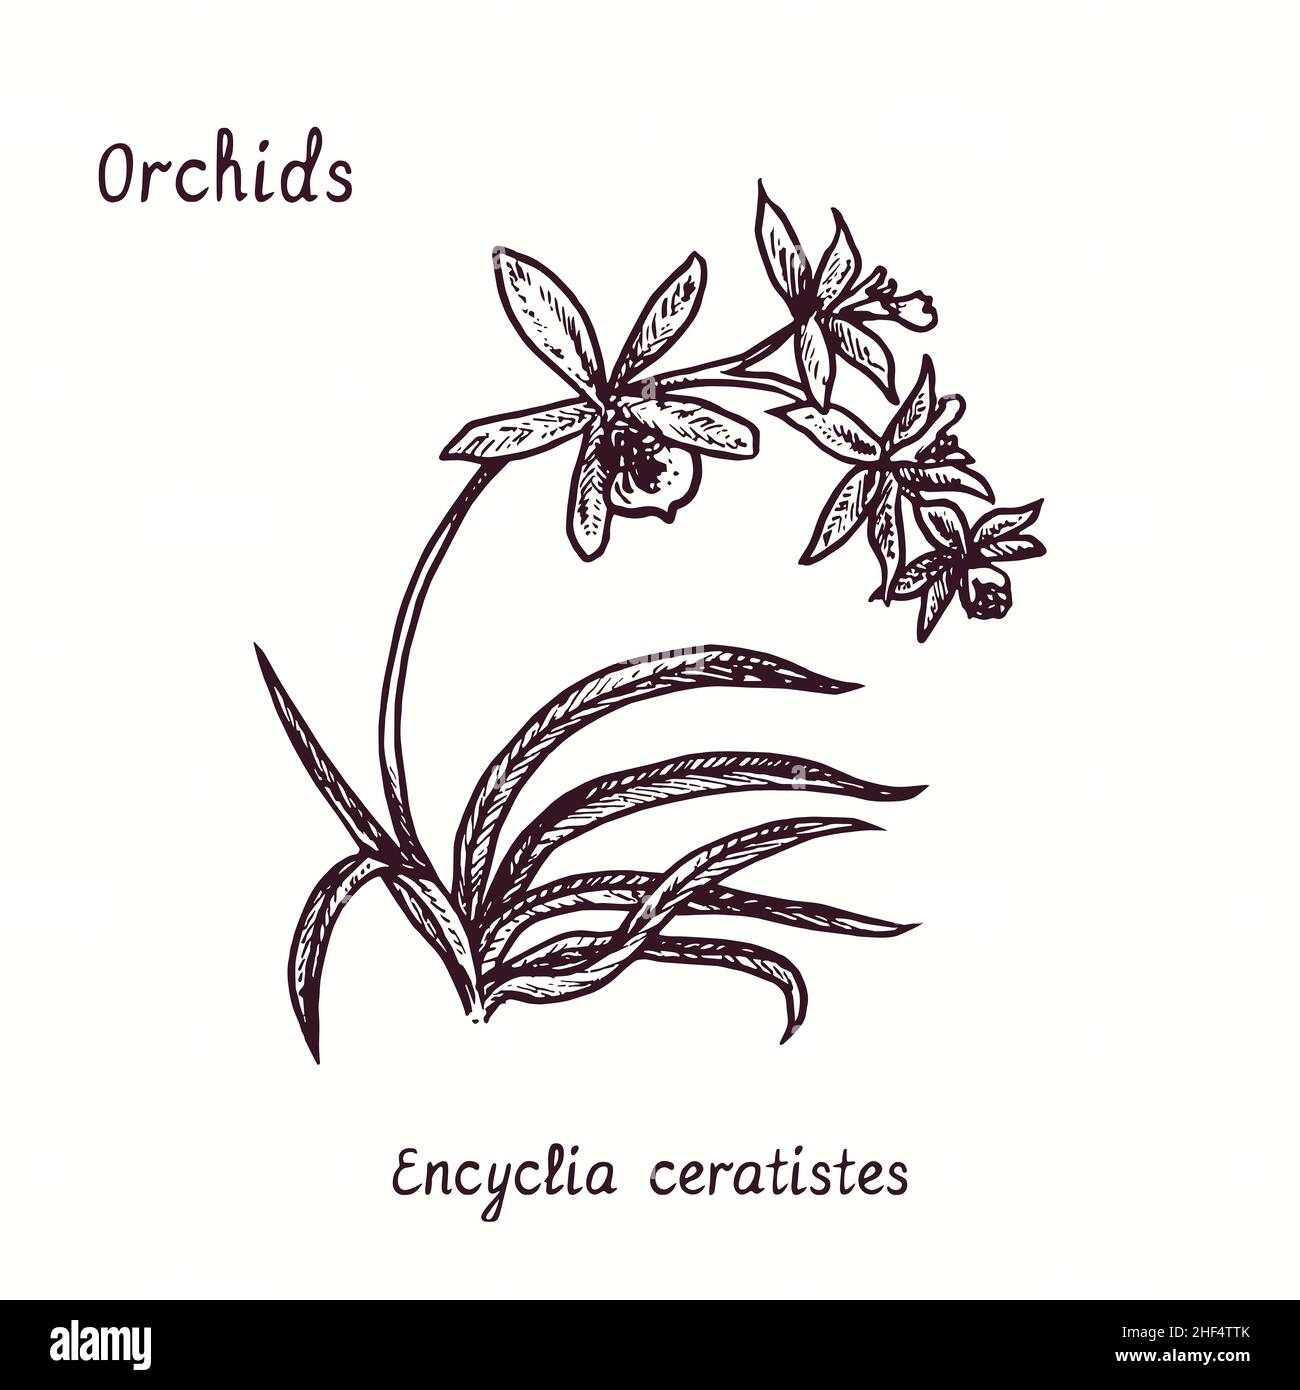 Encyclia ceratistes (Epidendrum ramonense, frosted rain) orchids flower collection. Ink black and white doodle drawing in woodcut style with inscripti Stock Photo